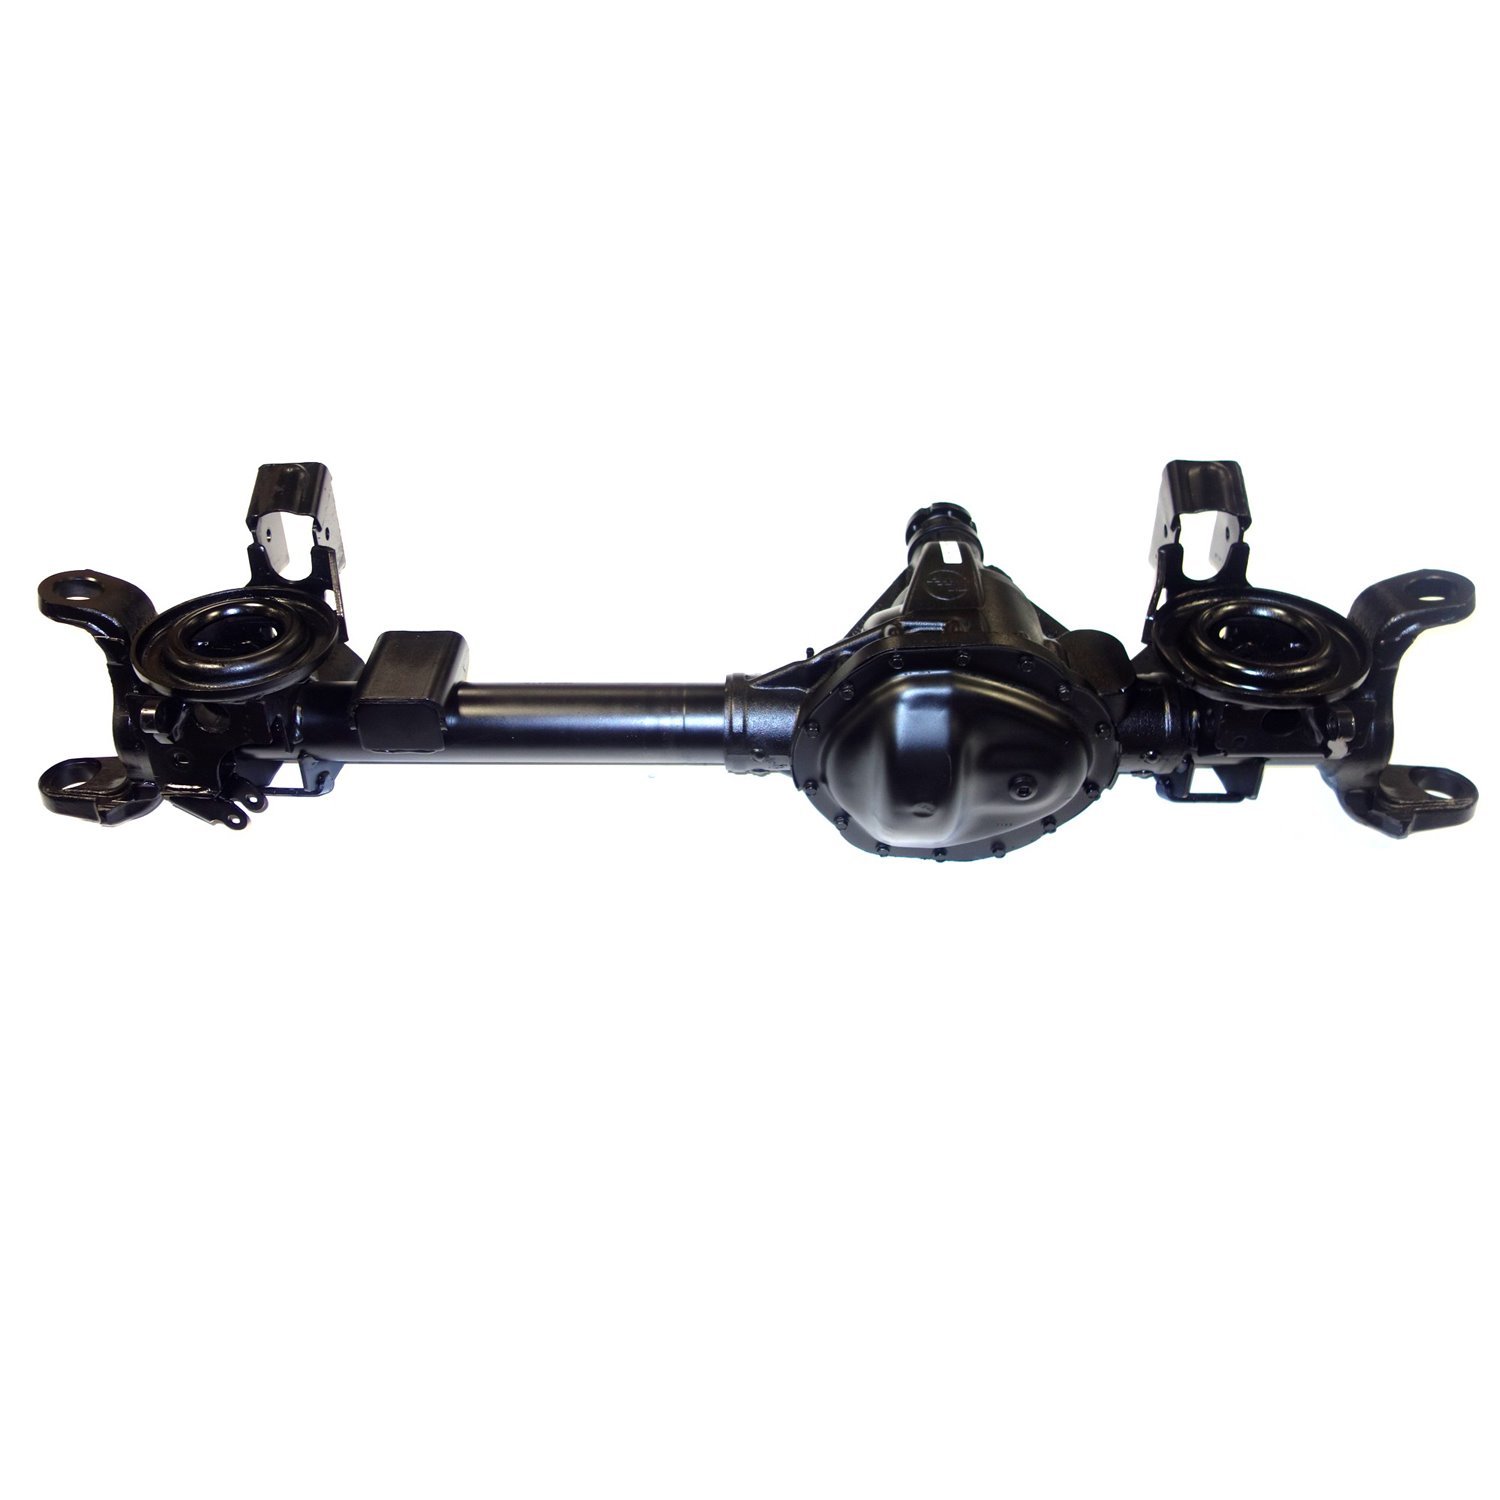 Remanufactured Complete Axle Assembly for Chrysler 9.25" Front 2009 Dodge Ram 3.73 Ratio